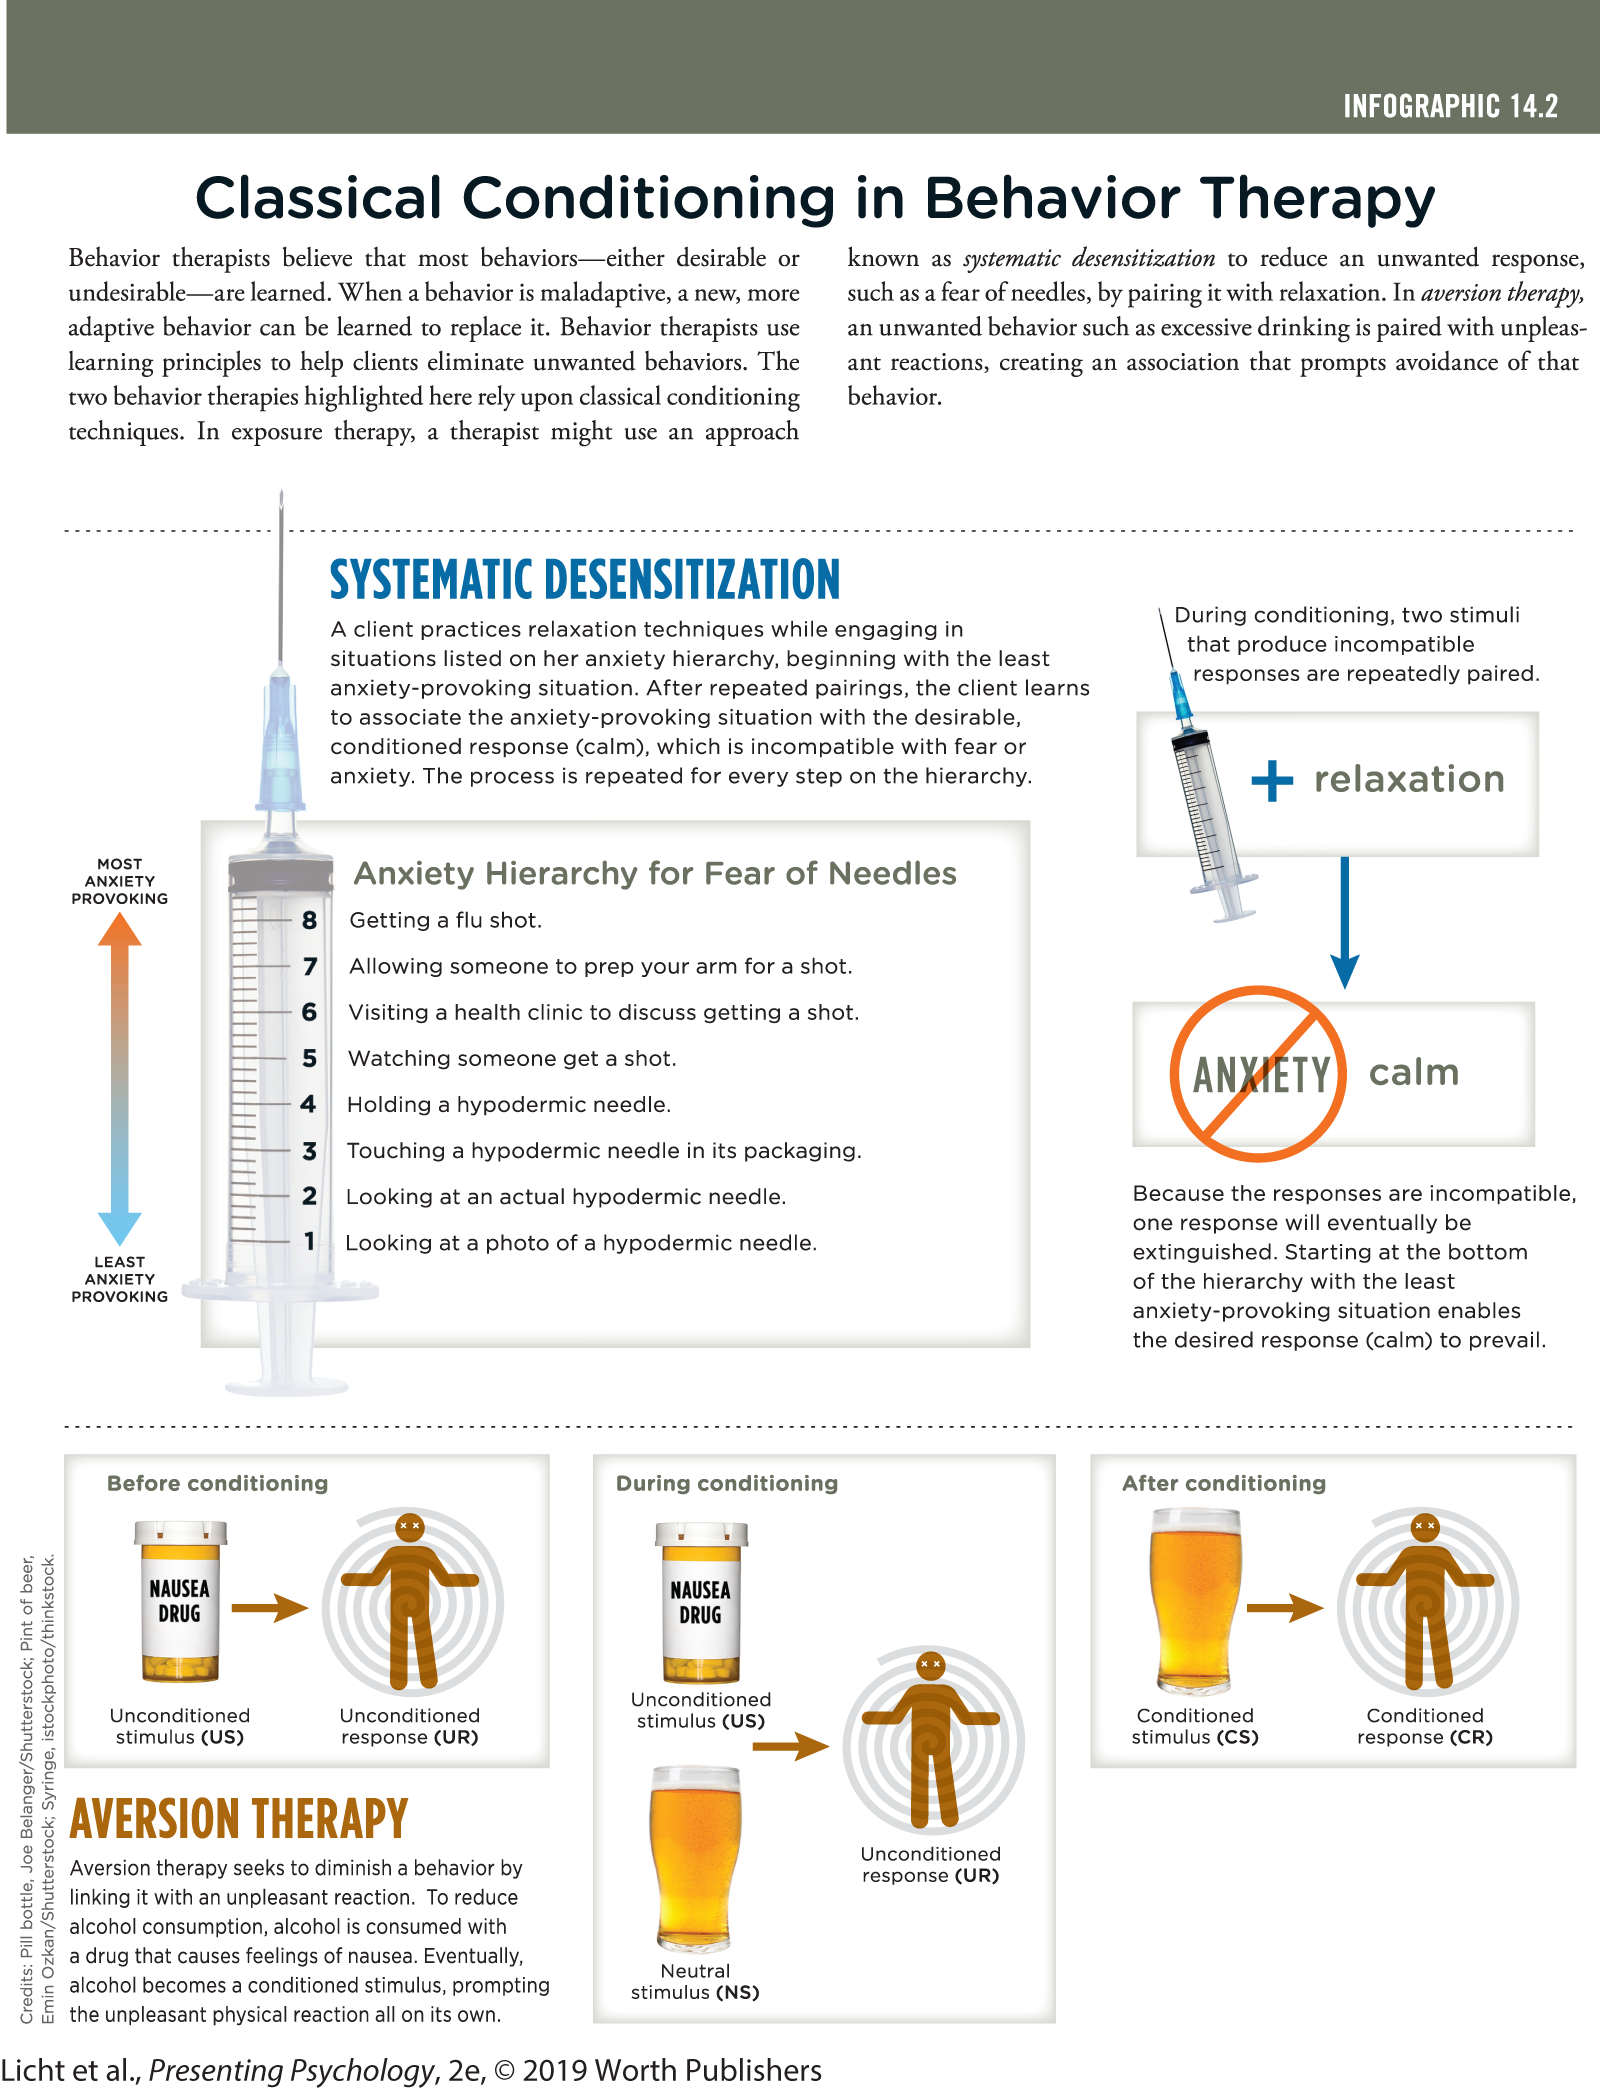 An infographic on classical conditioning by behavior therapists depicts triggers for anxiety and aversion therapy. You can read full description from the link below